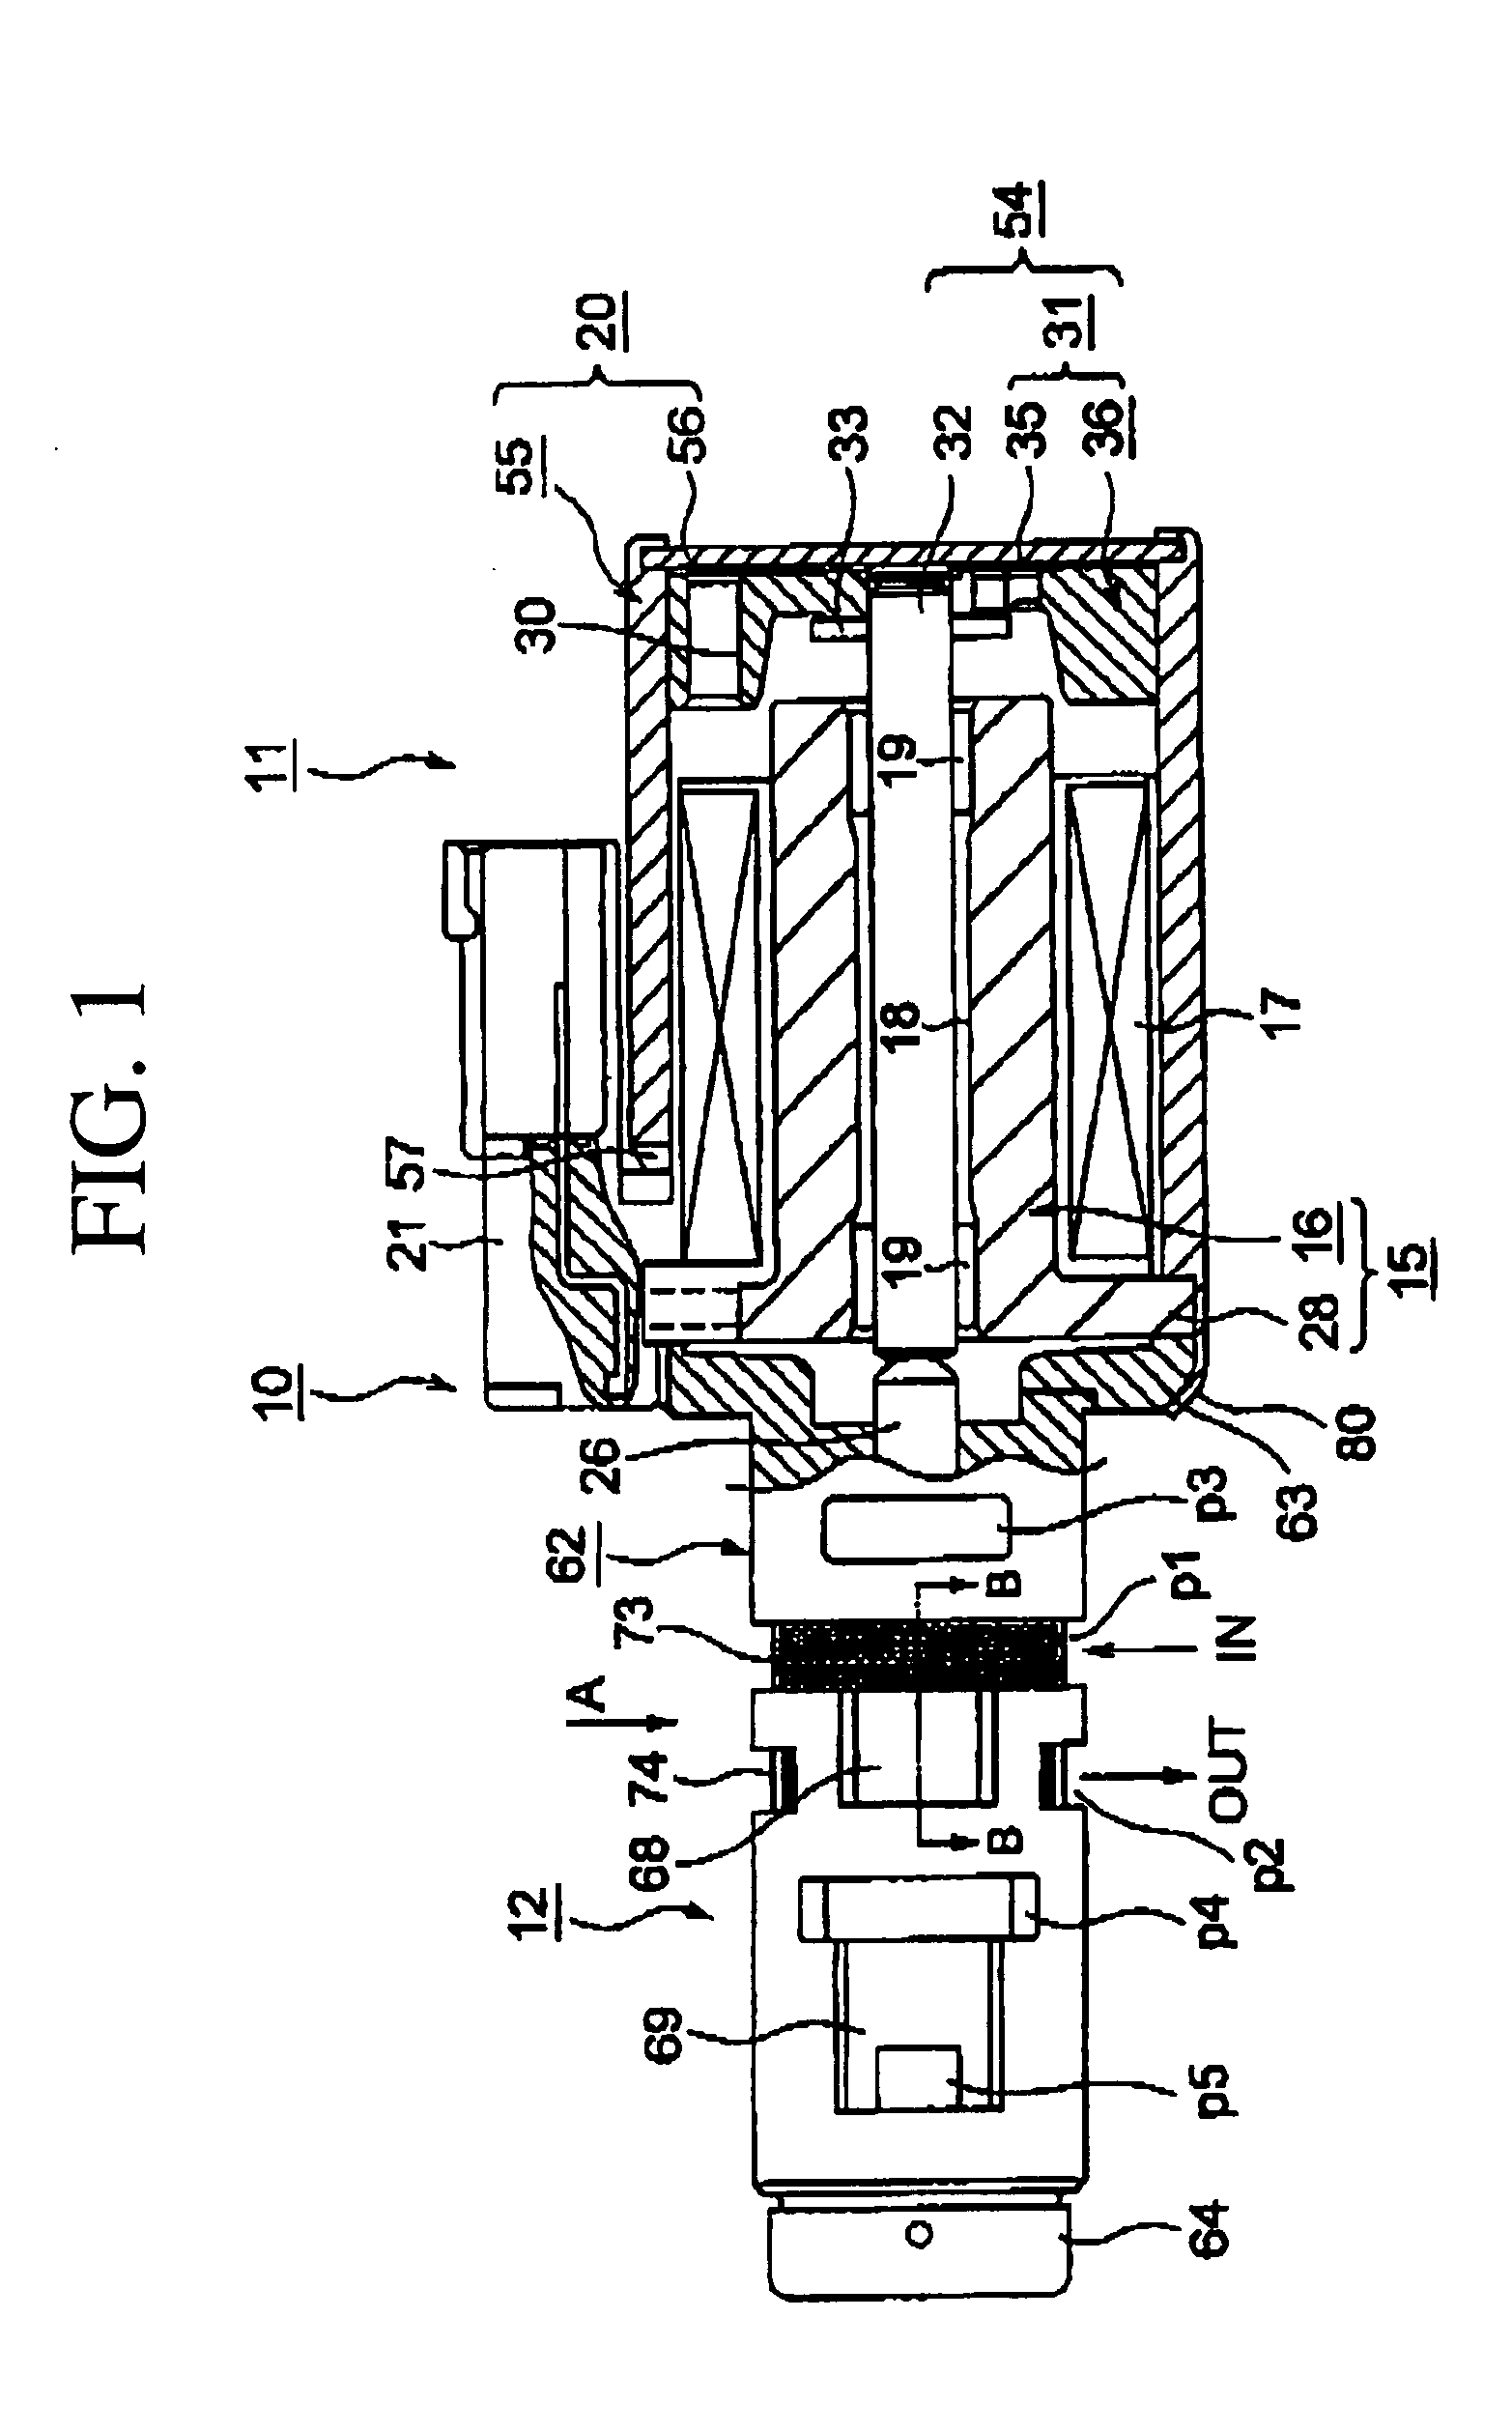 Strainer and Control Valve